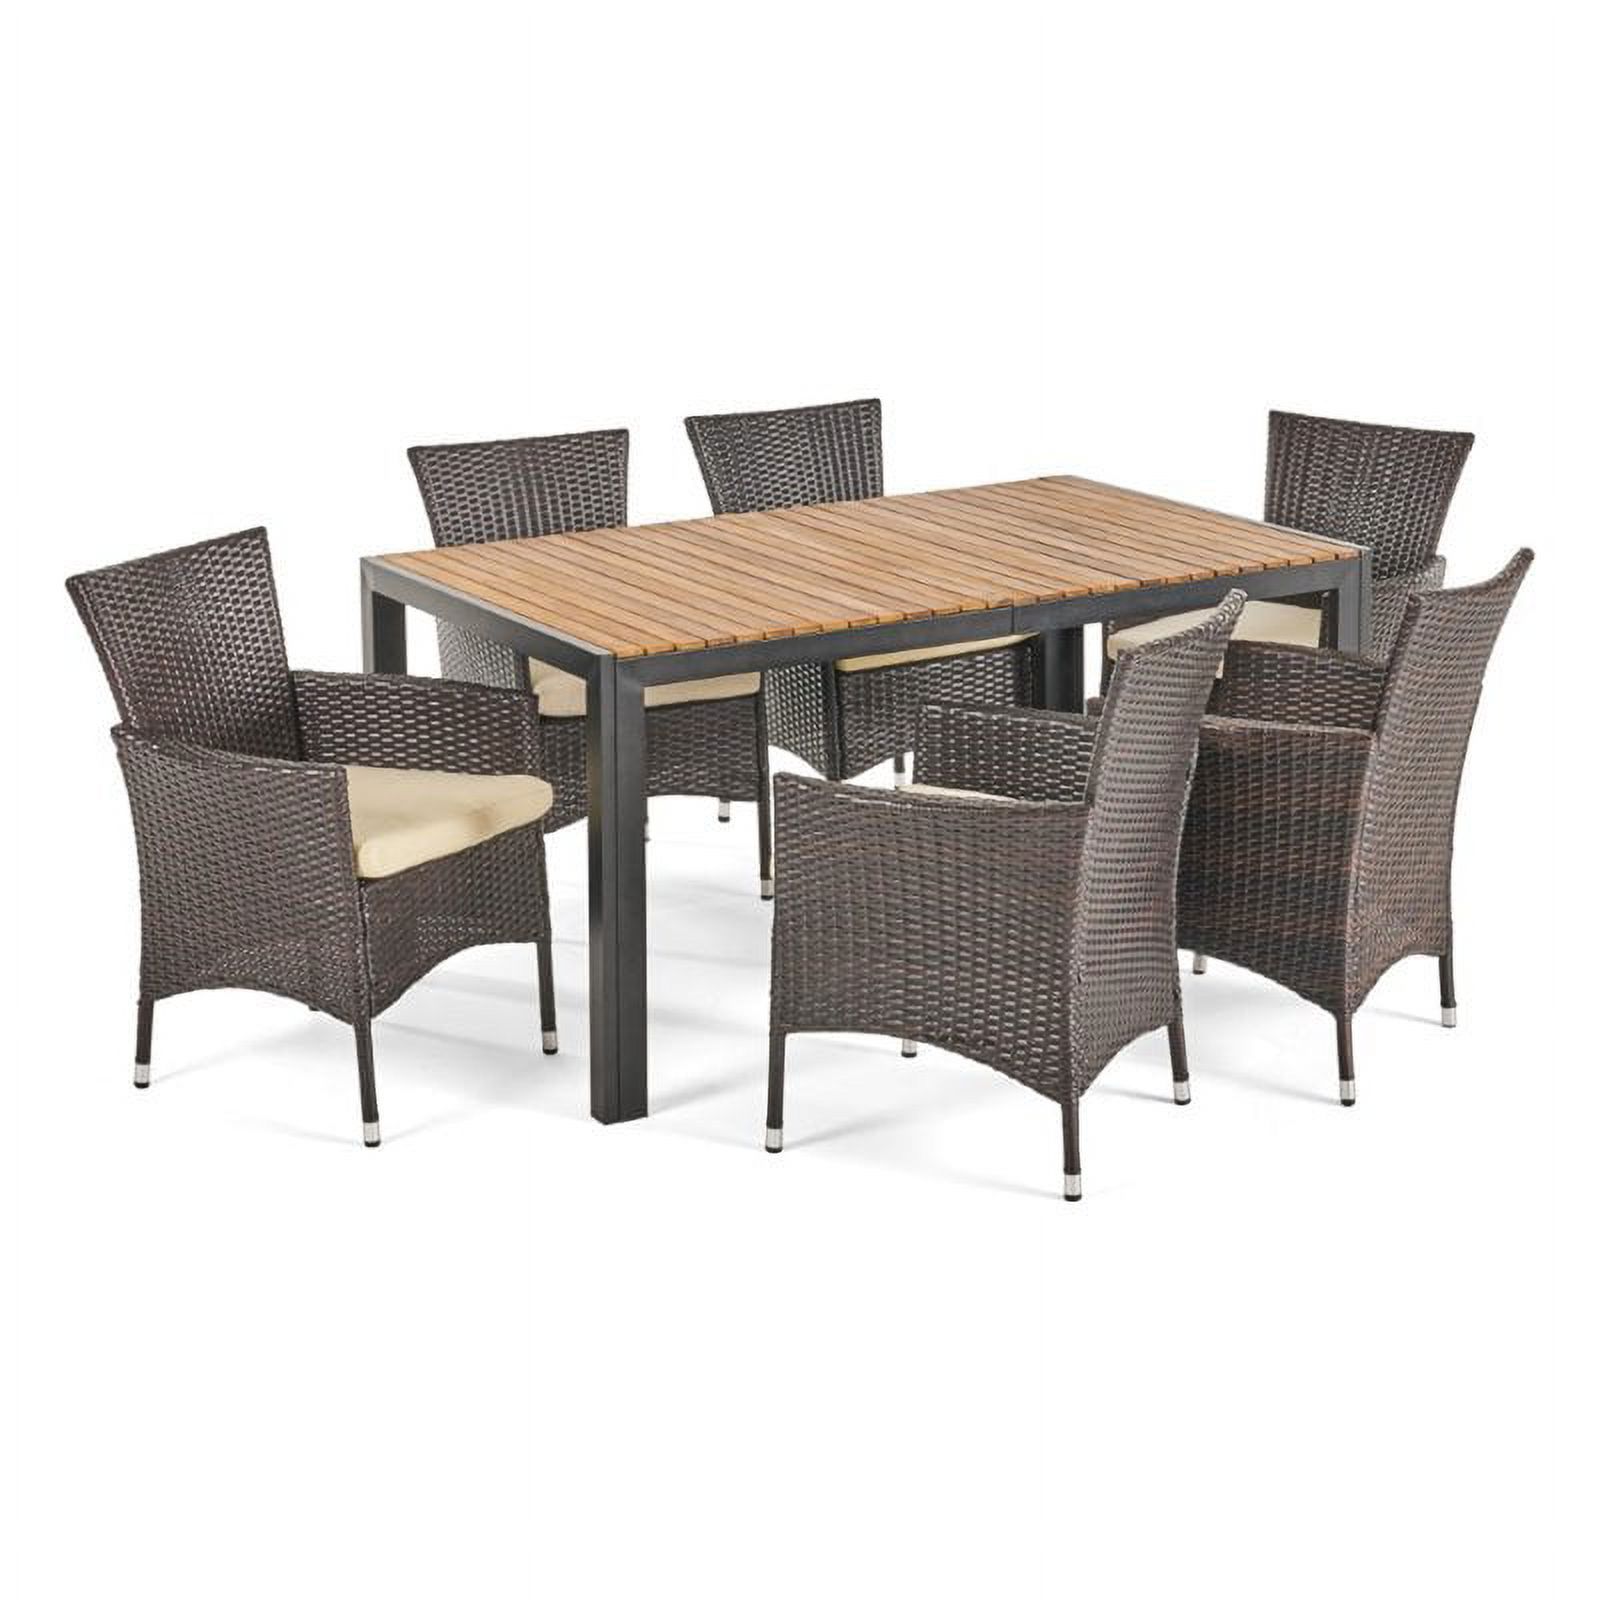 Ariella Outdoor 7 Piece Rectangular Acacia Wood and Wicker Dining Set with Cushions, Multi Brown, Teak, Beige - image 1 of 7